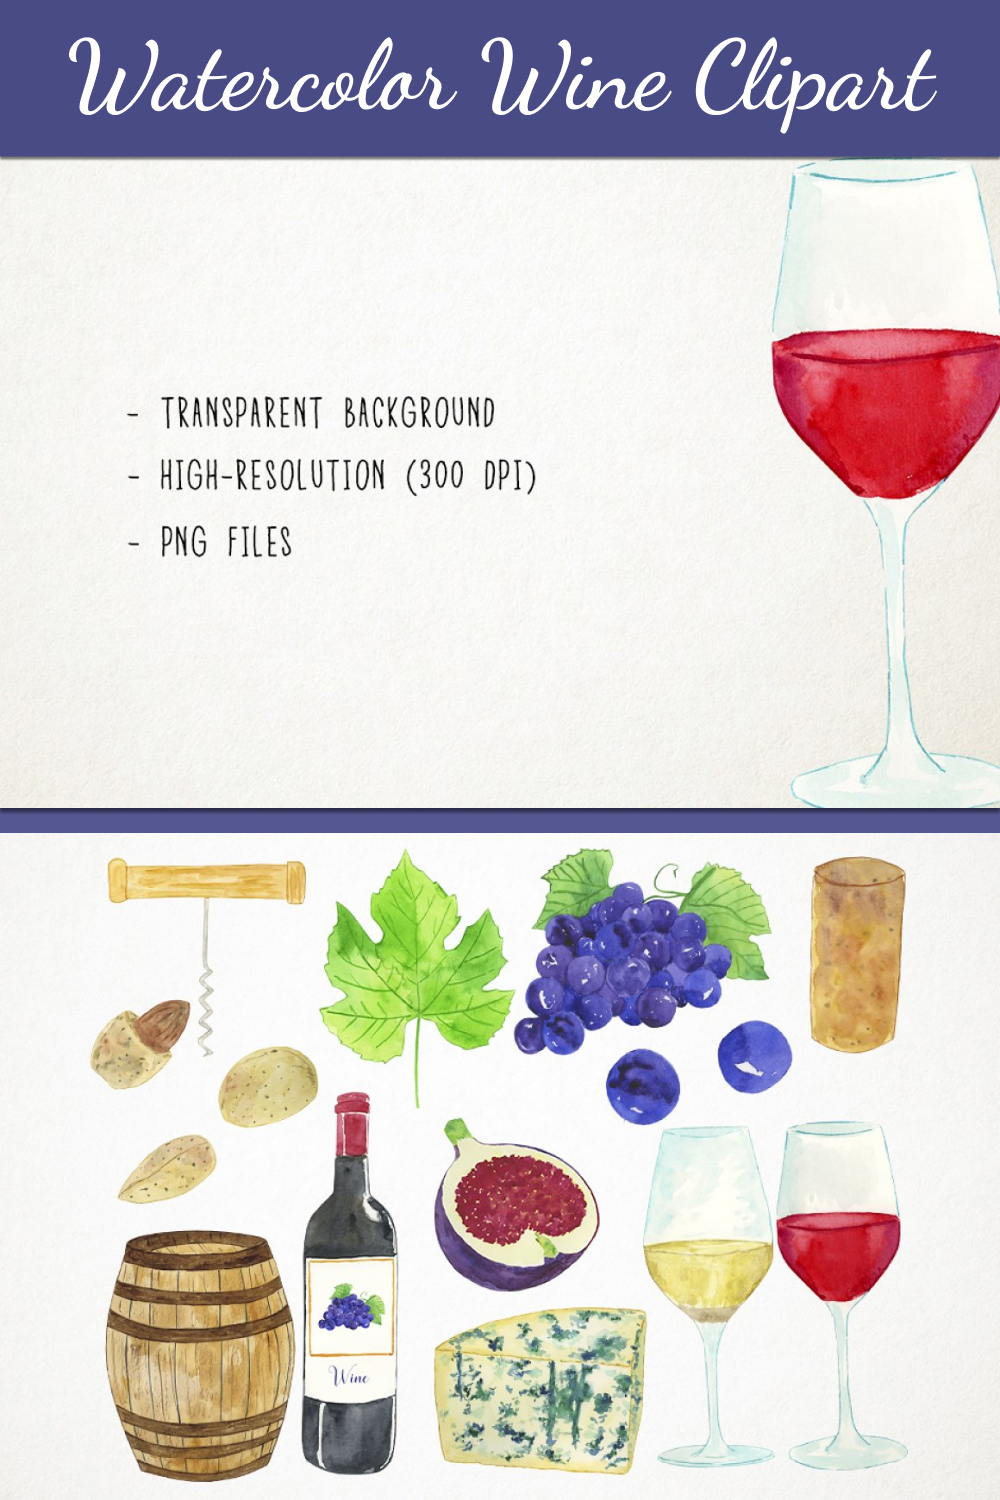 Watercolor wine clipart of pinterest.